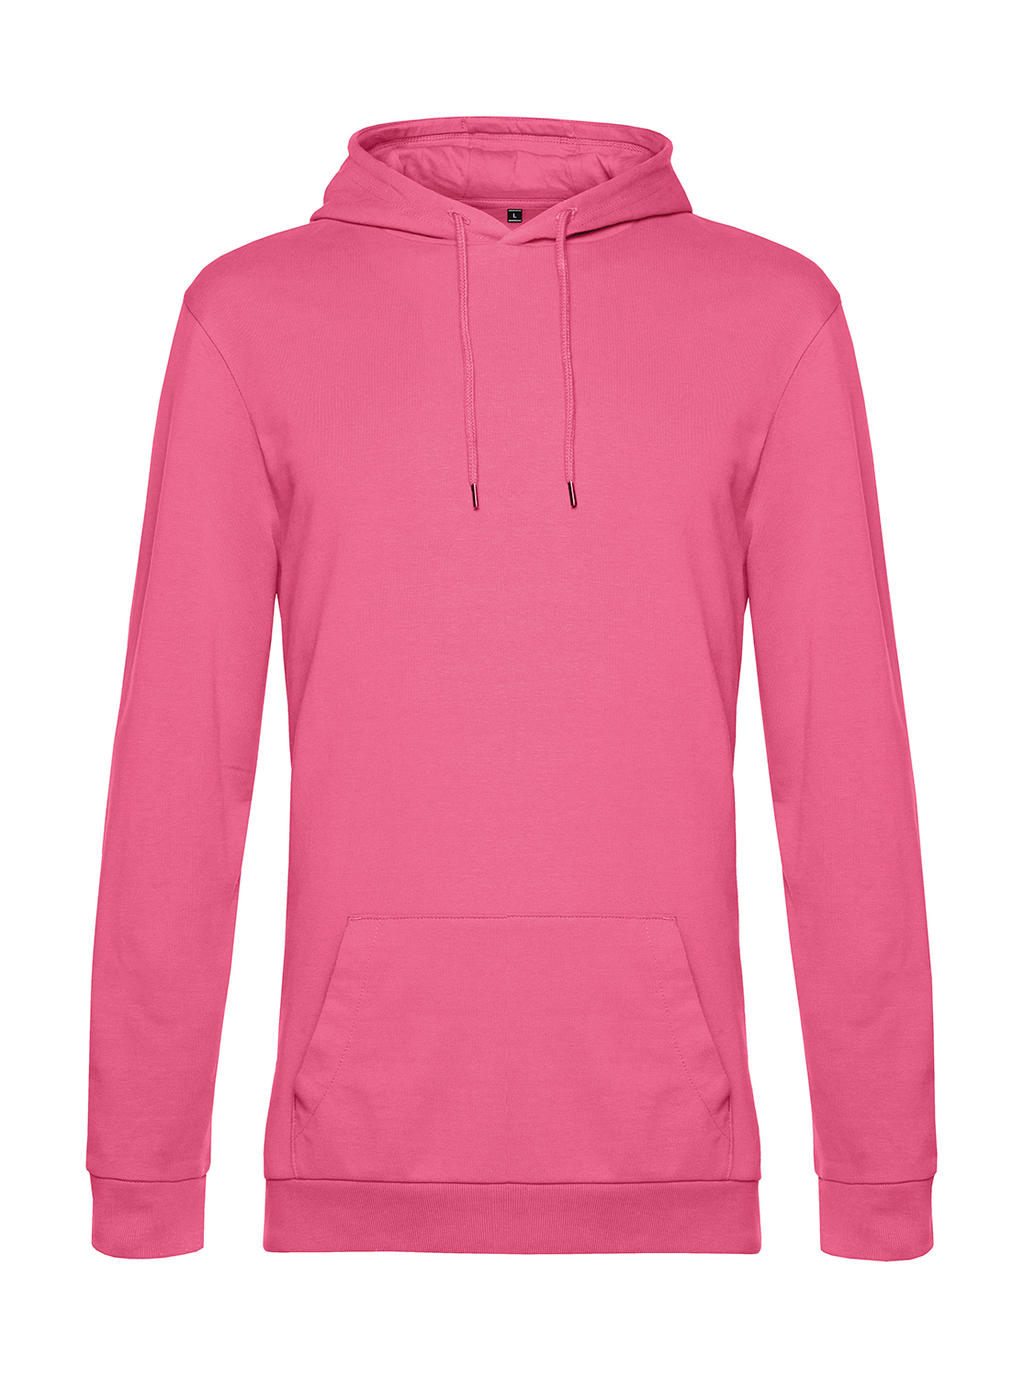 Mikina s kapucňou #Hoodie French Terry - pink fizz